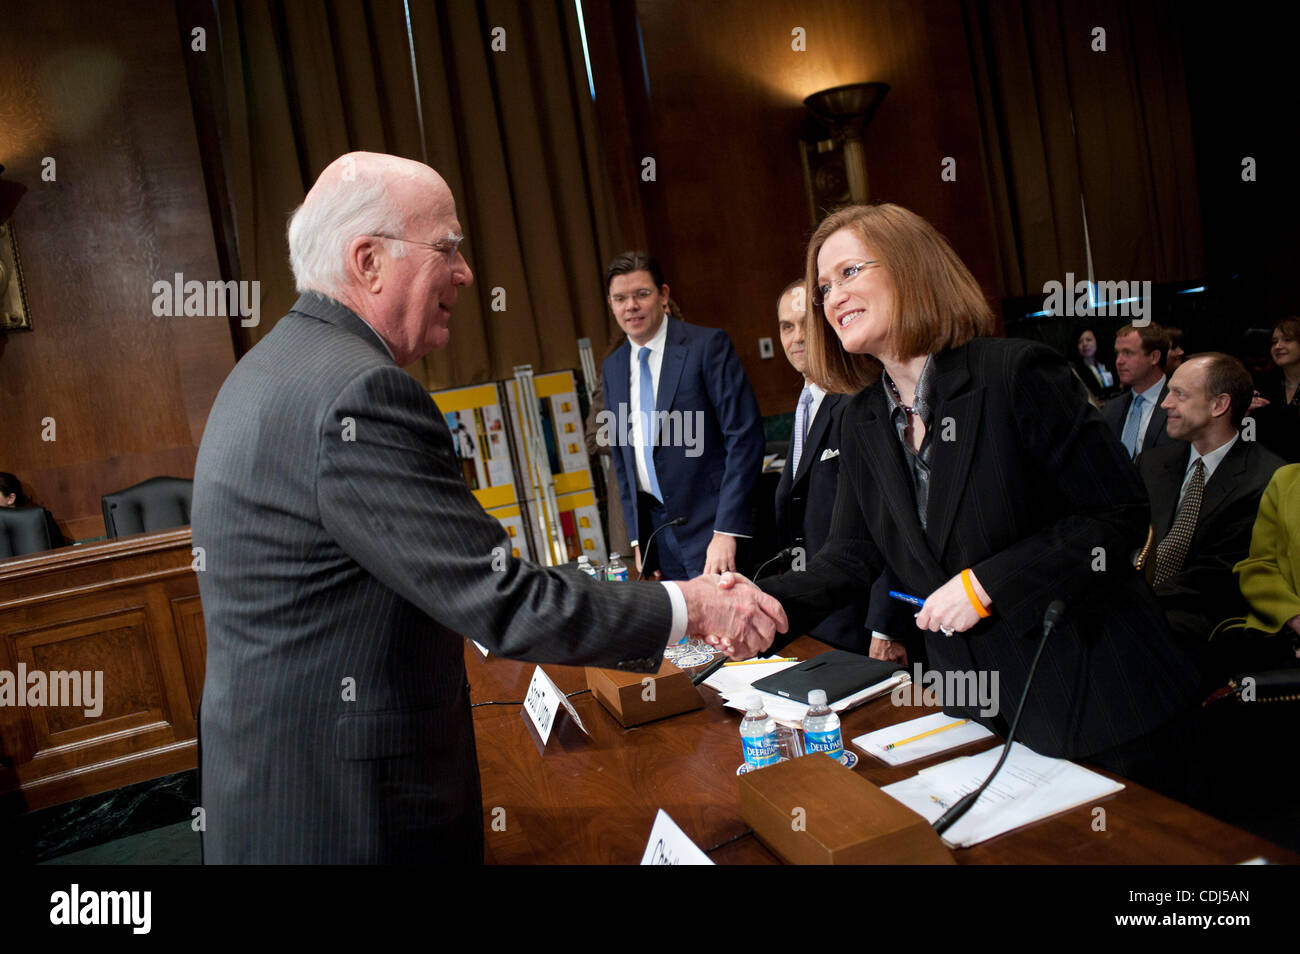 Feb 16, 2011 - Washington, District of Columbia, U.S. - Senator PATRICK LEAHY (D-VT) greets Christine Jones, general counsel and corporate secretary of The Go Daddy Group Inc. before a Senate Judiciary Committee hearing on ''Targeting Websites Dedicated To Stealing American Intellectual Property. (C Stock Photo